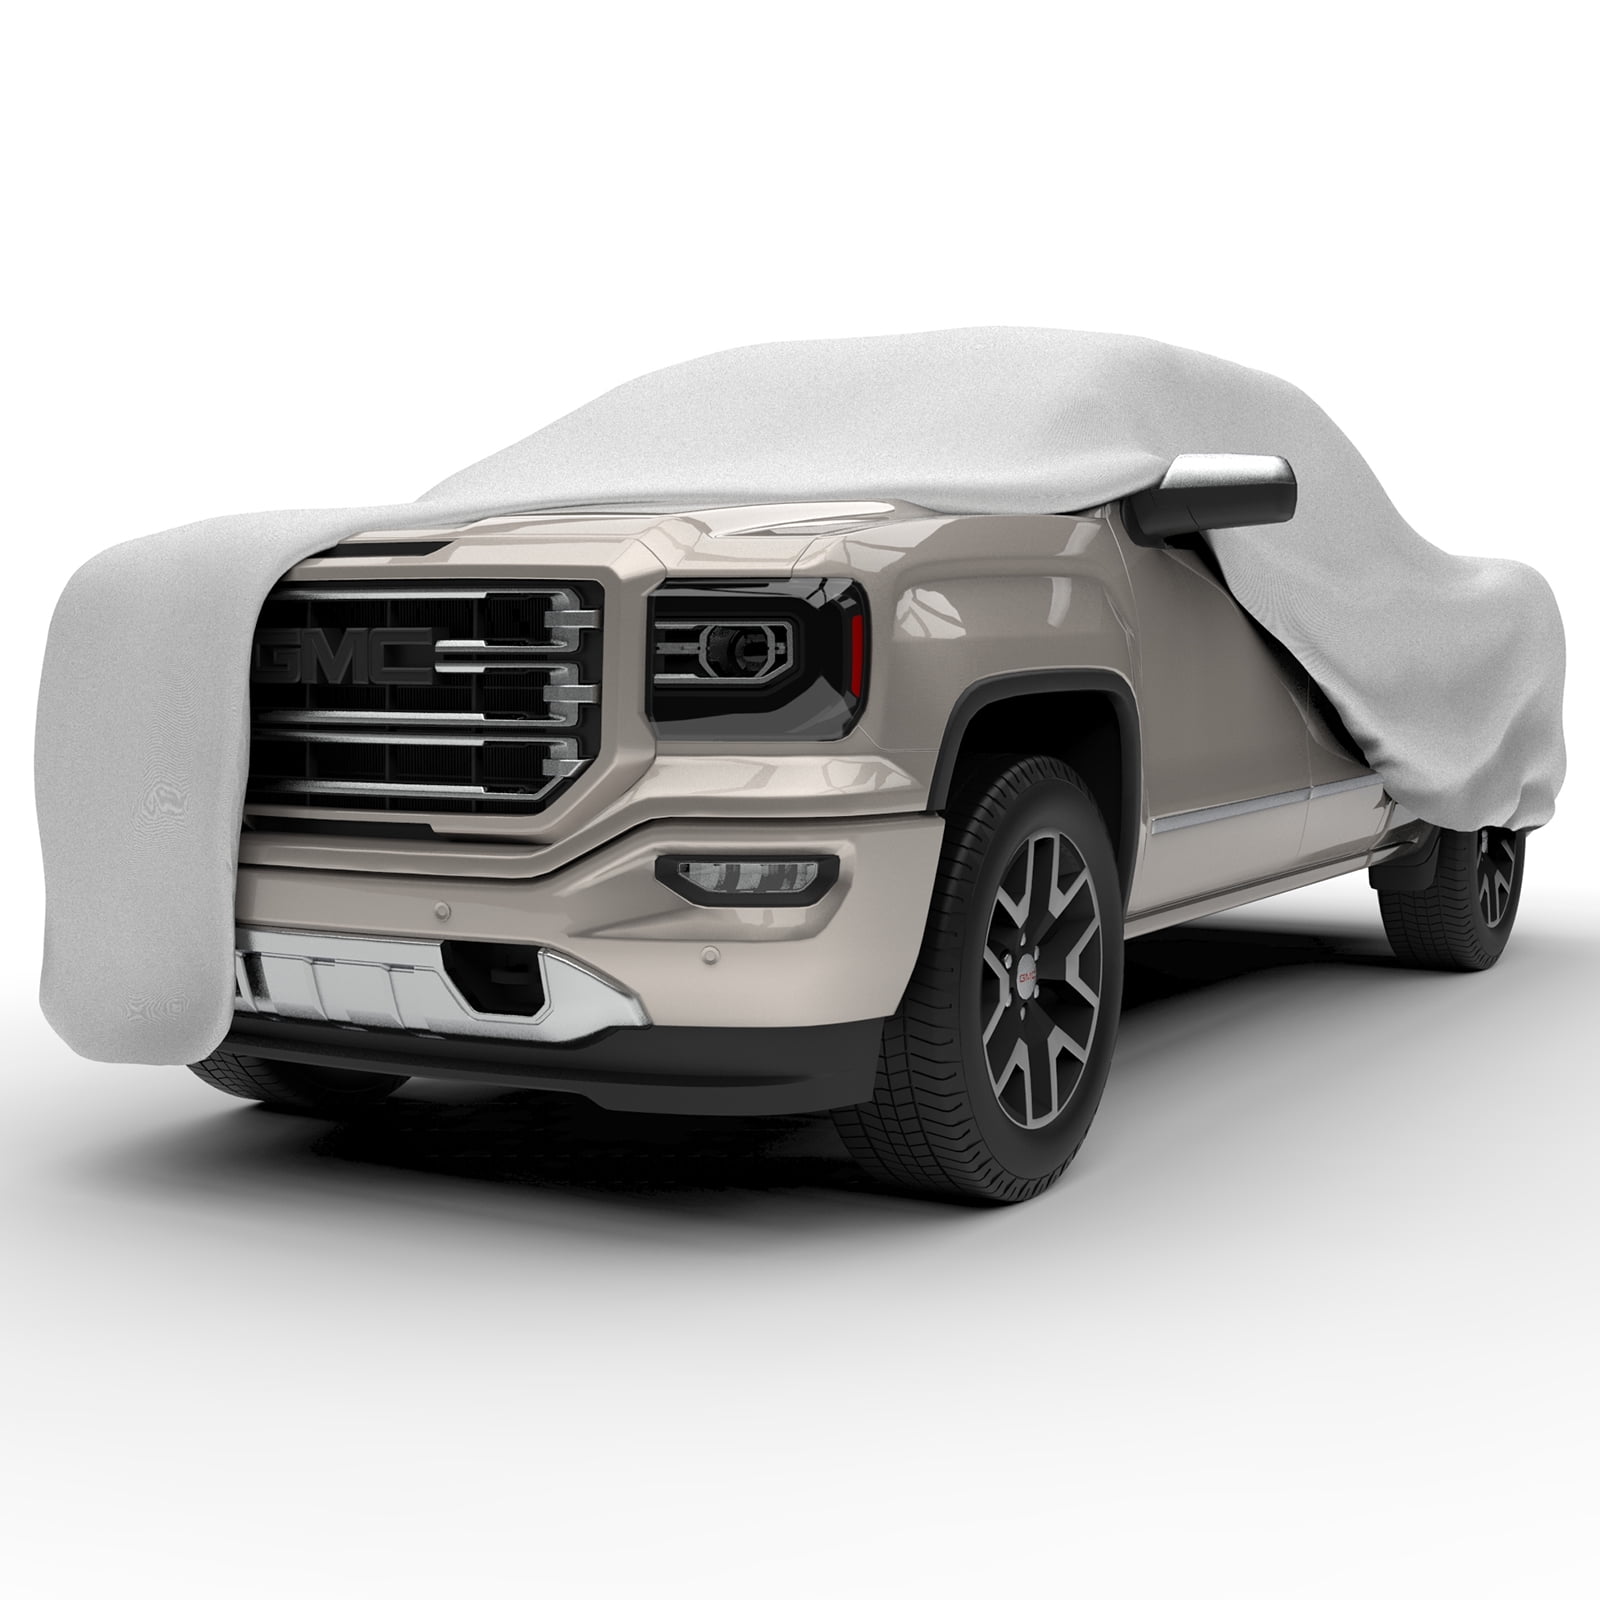 Budge Industries Ultra Truck Cover, Standard UV and Dirt Protection Multiple Sizes